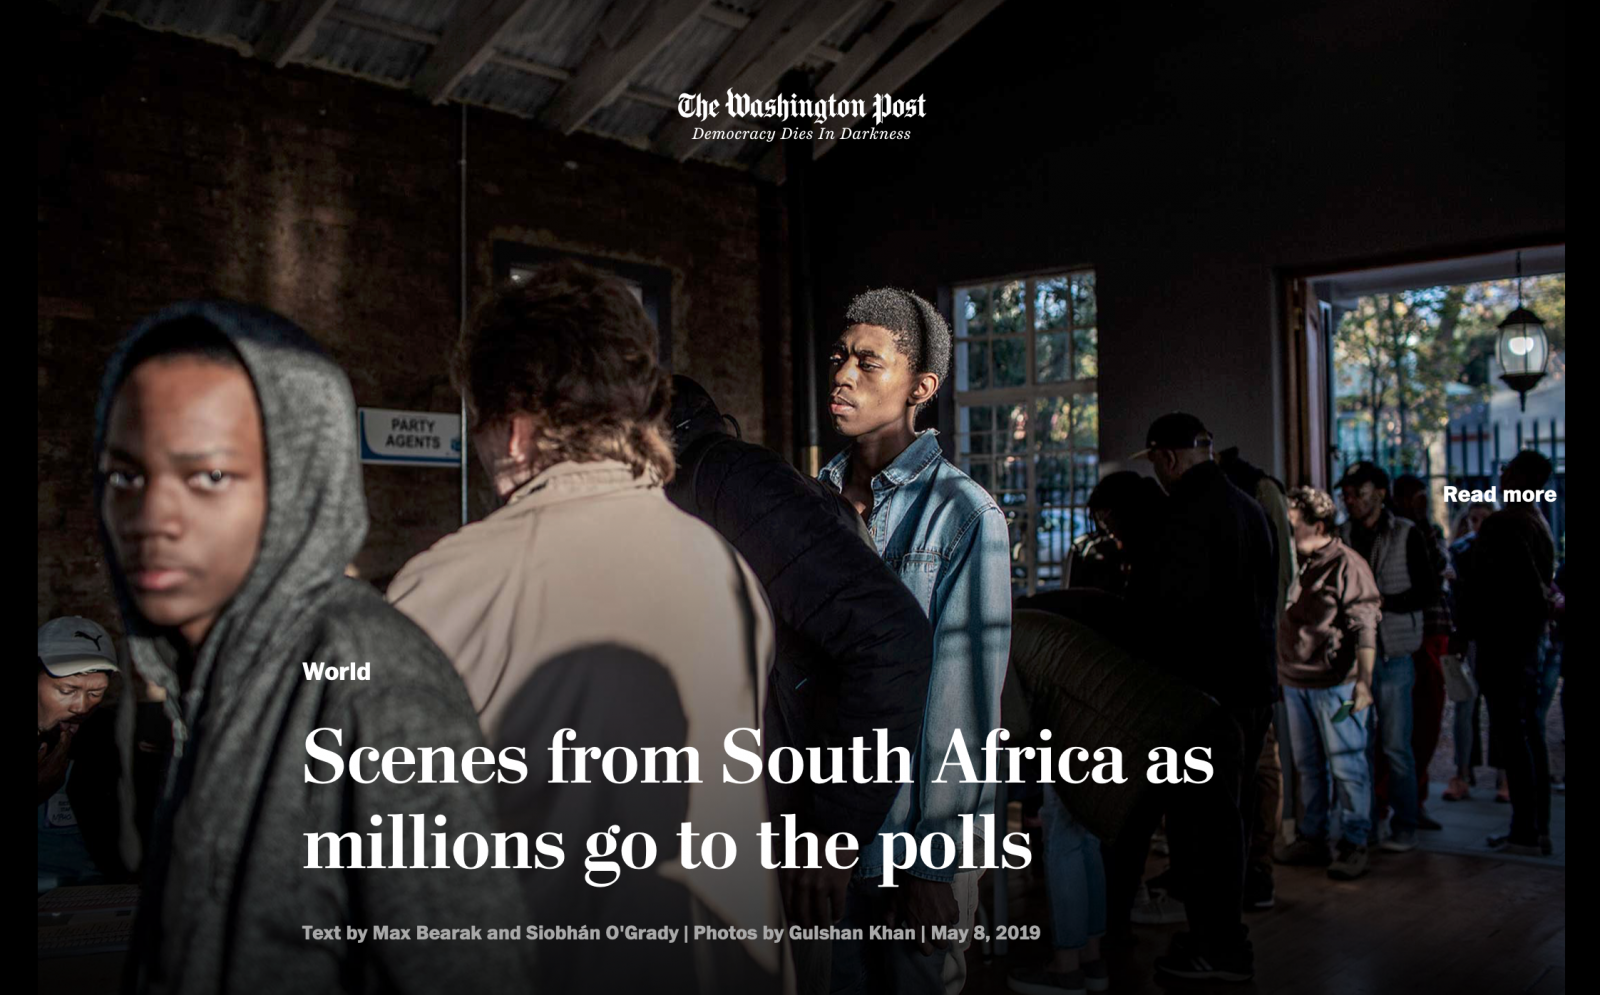 Thumbnail of for The Washington Post: Scenes from South Africa as millions go to the polls